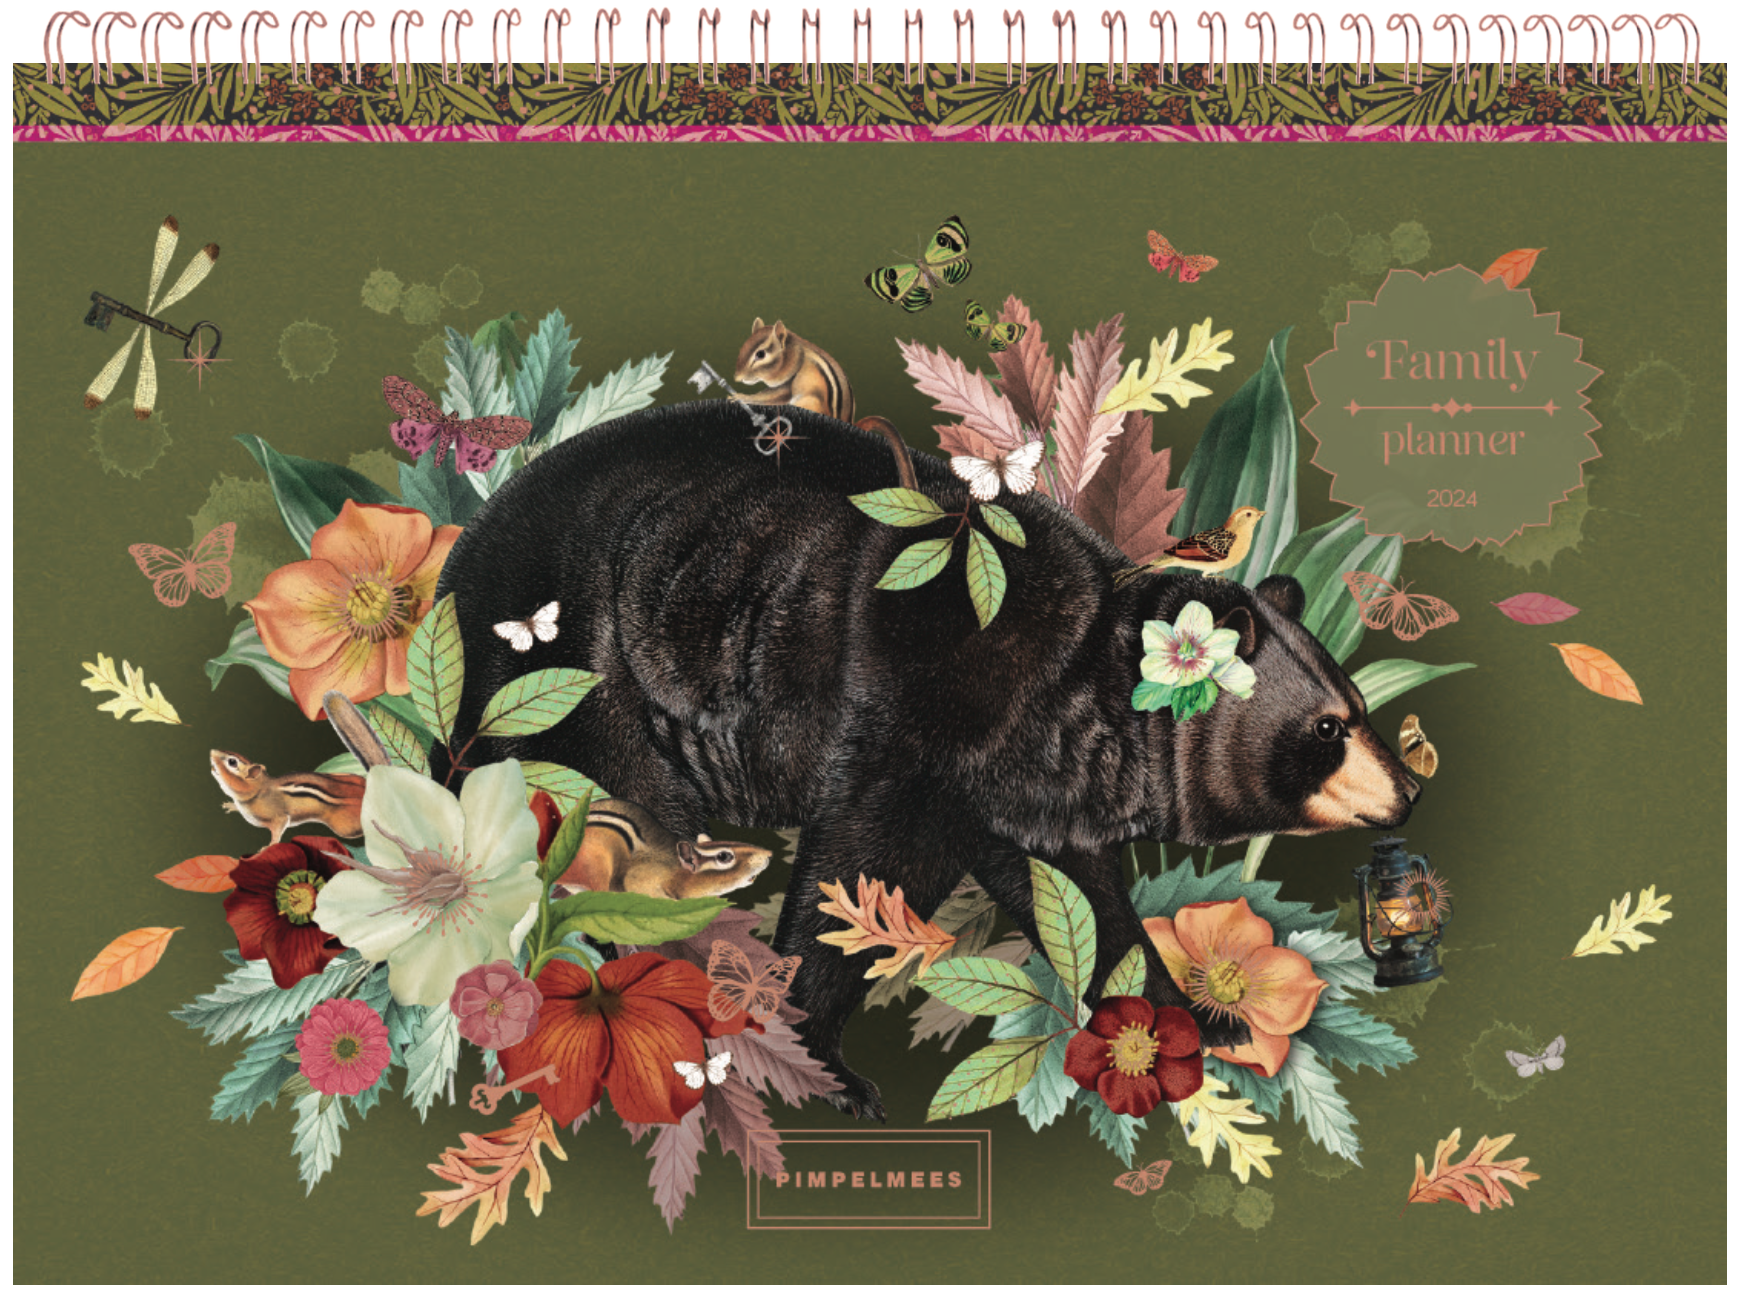 Pimpelmees family planner 2024 - Bear Olive